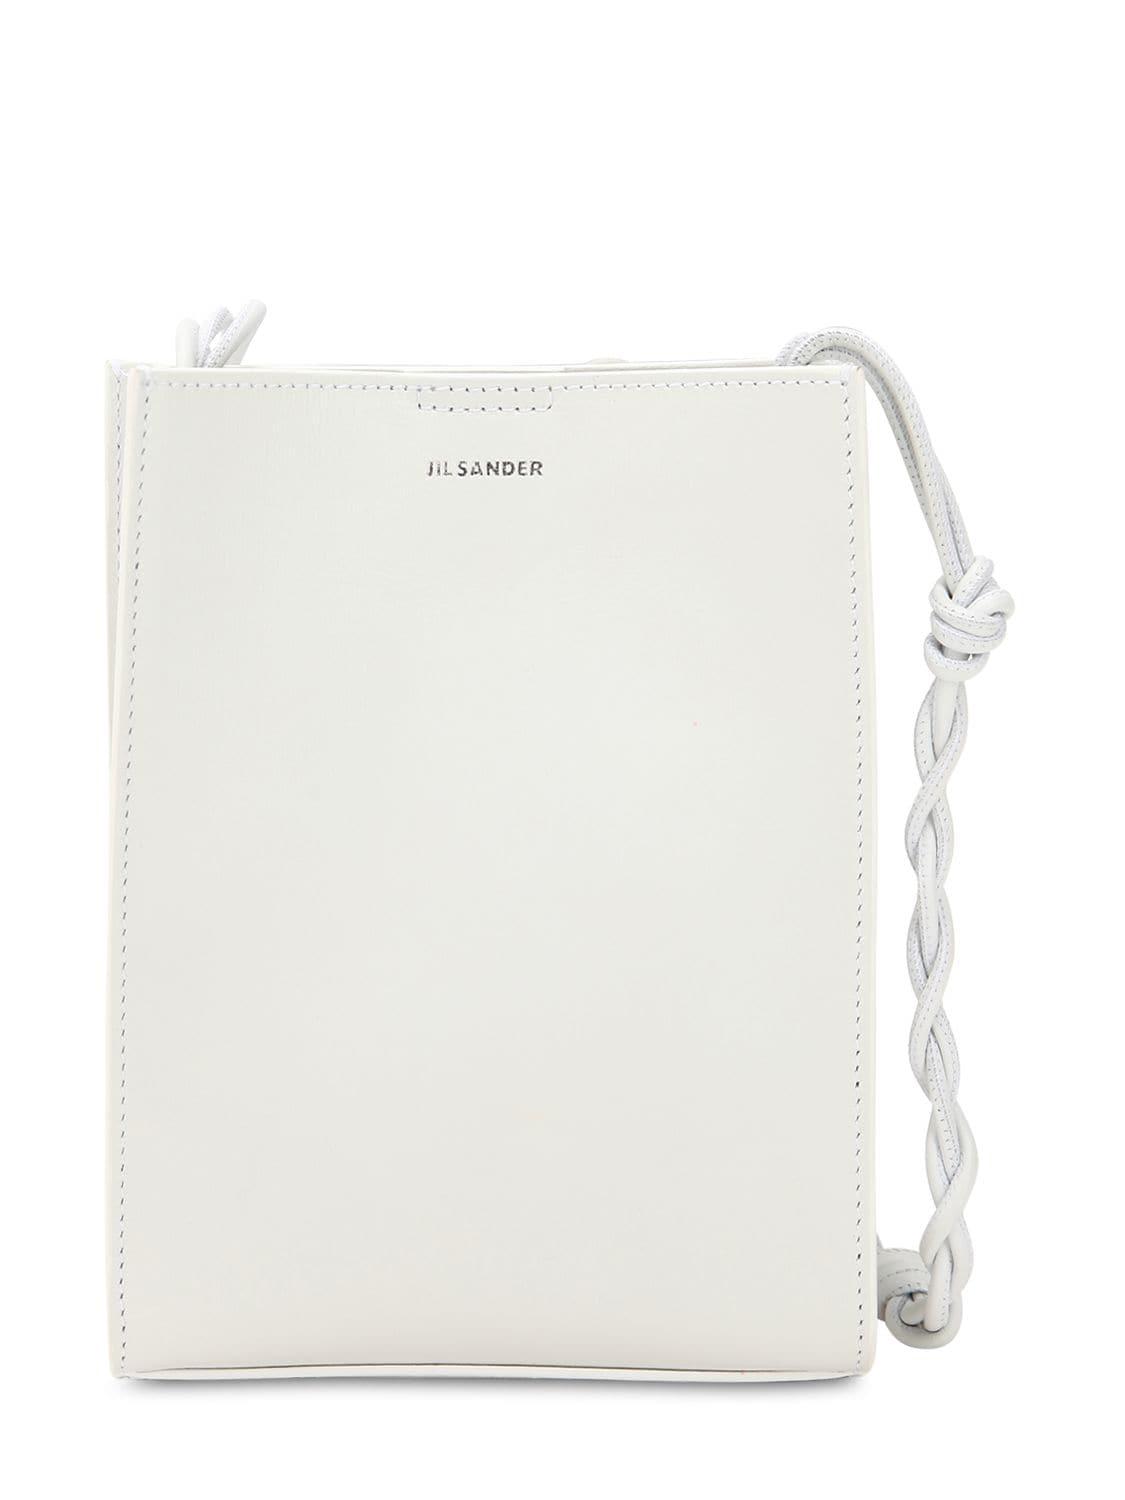 Jil Sander Tangle Small Leather Shoulder Bag in Ivory (White) - Lyst